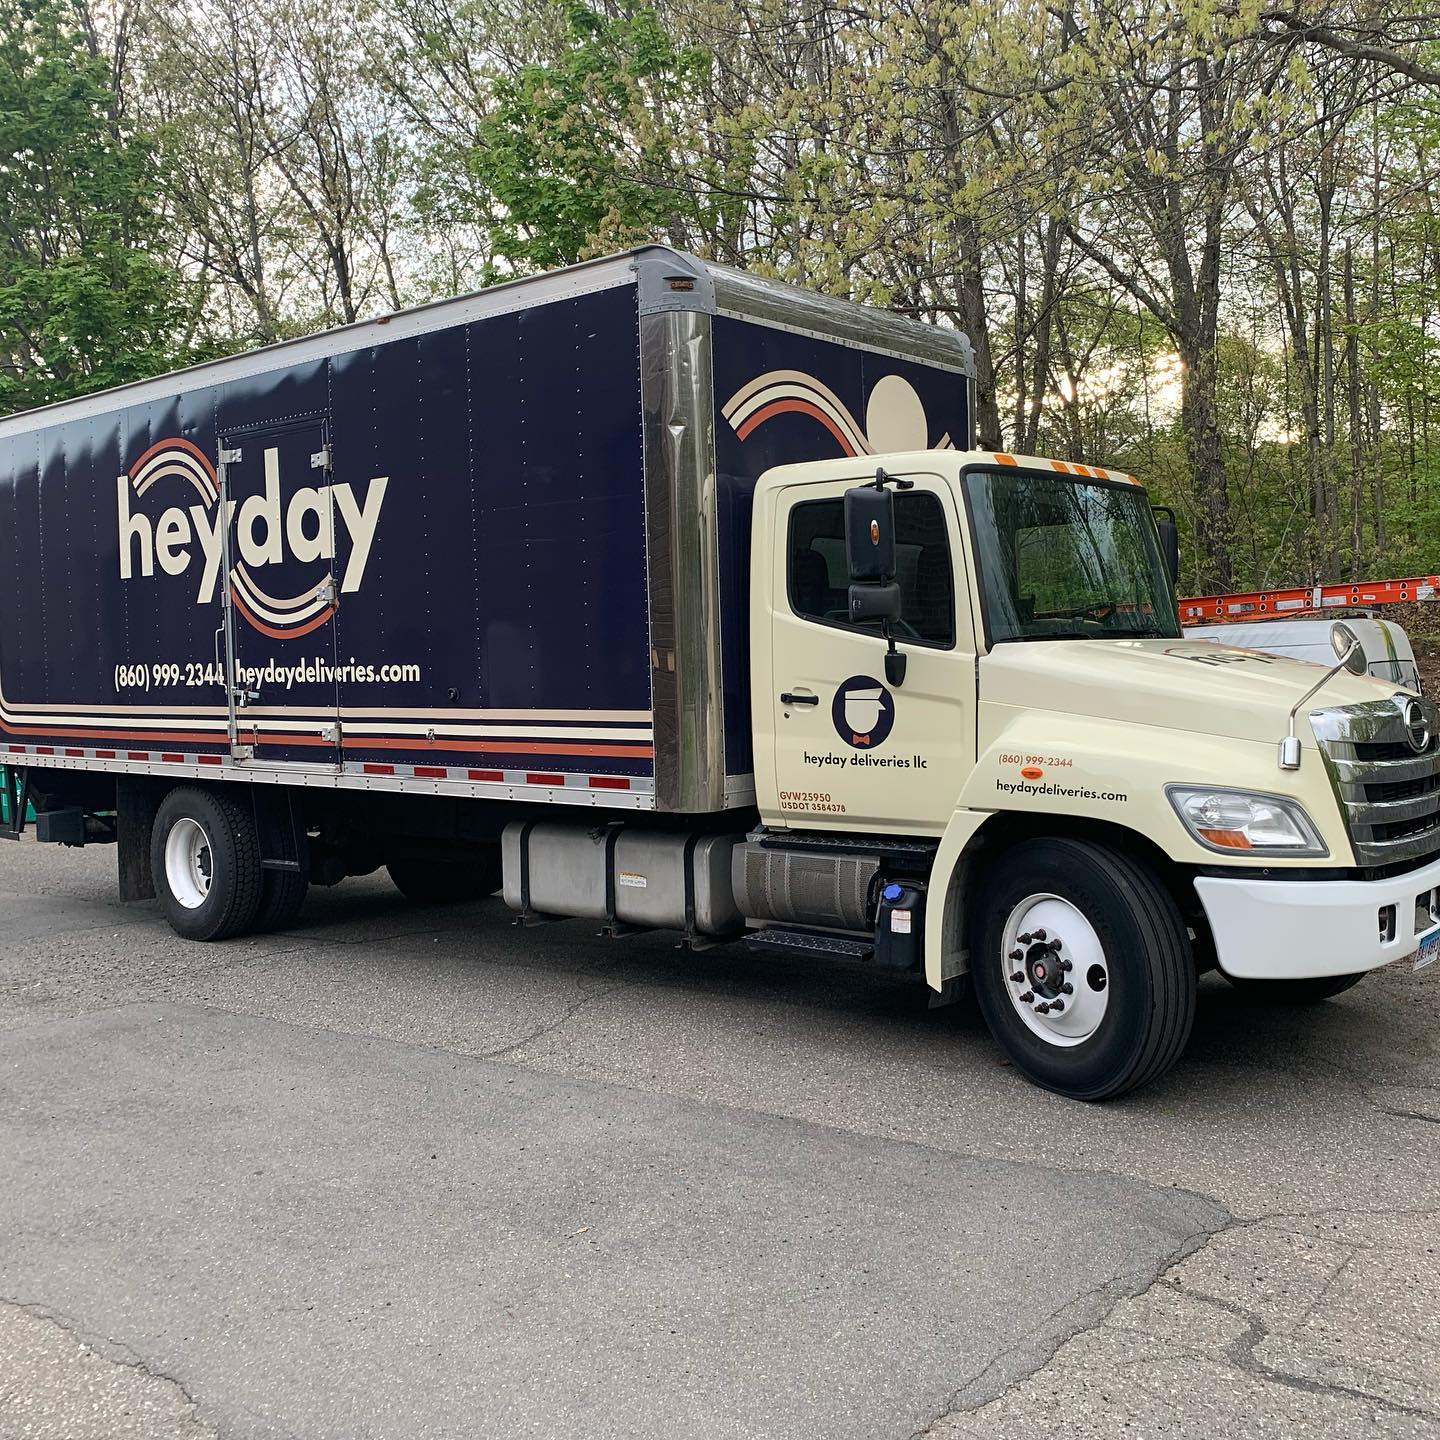 Hyeday Deliveries 2